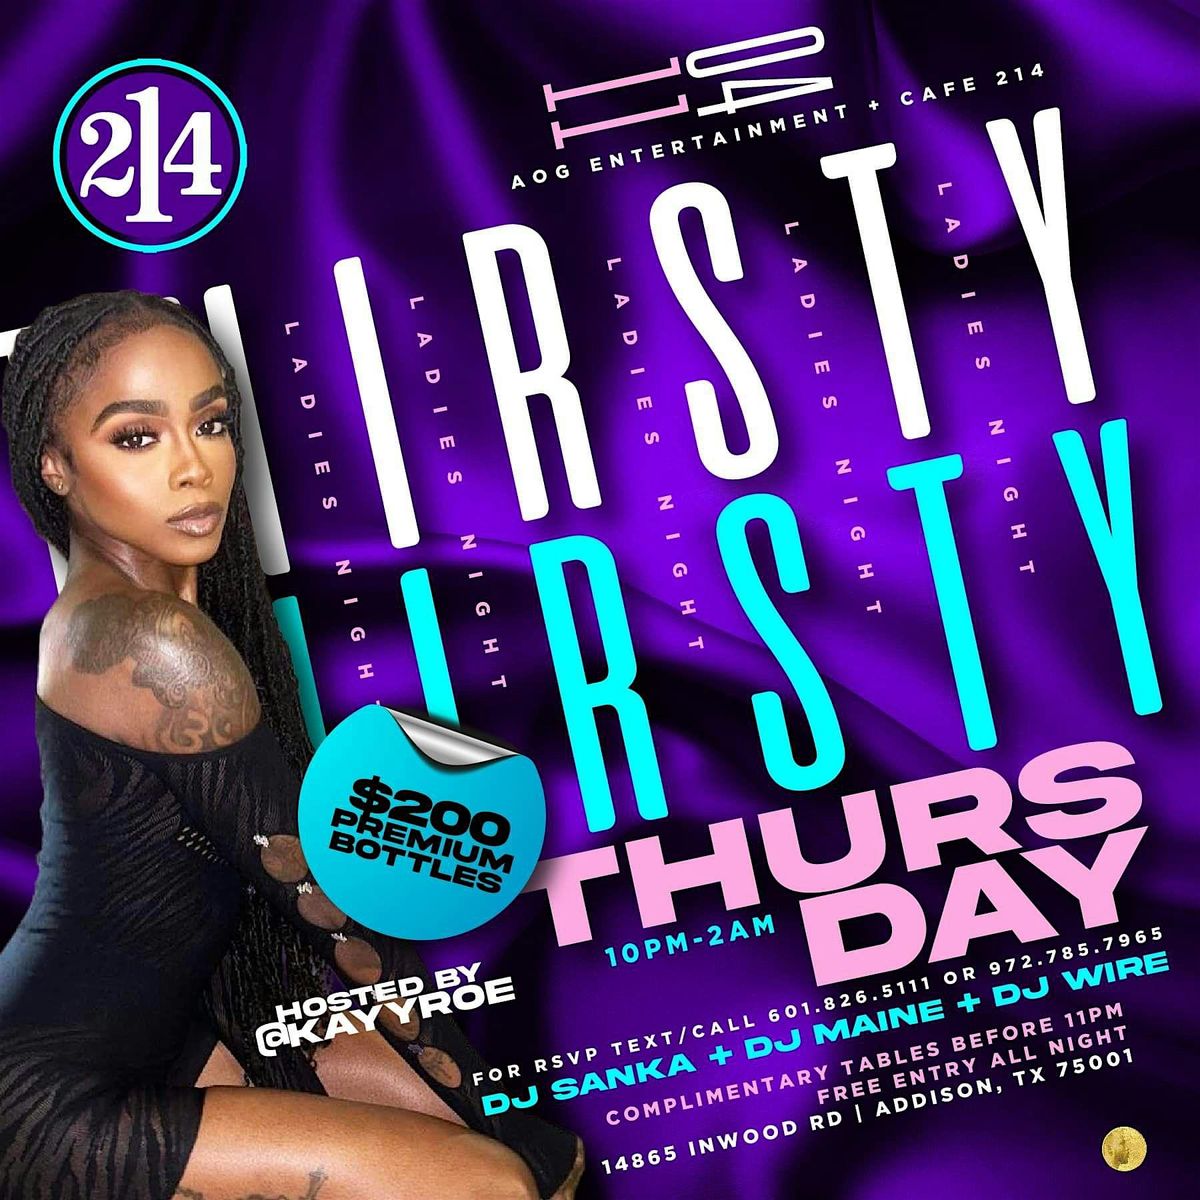 THIRSTY THURSDAY + LADIES NIGHT+ FREE ENTRY + FREE SECTIONS